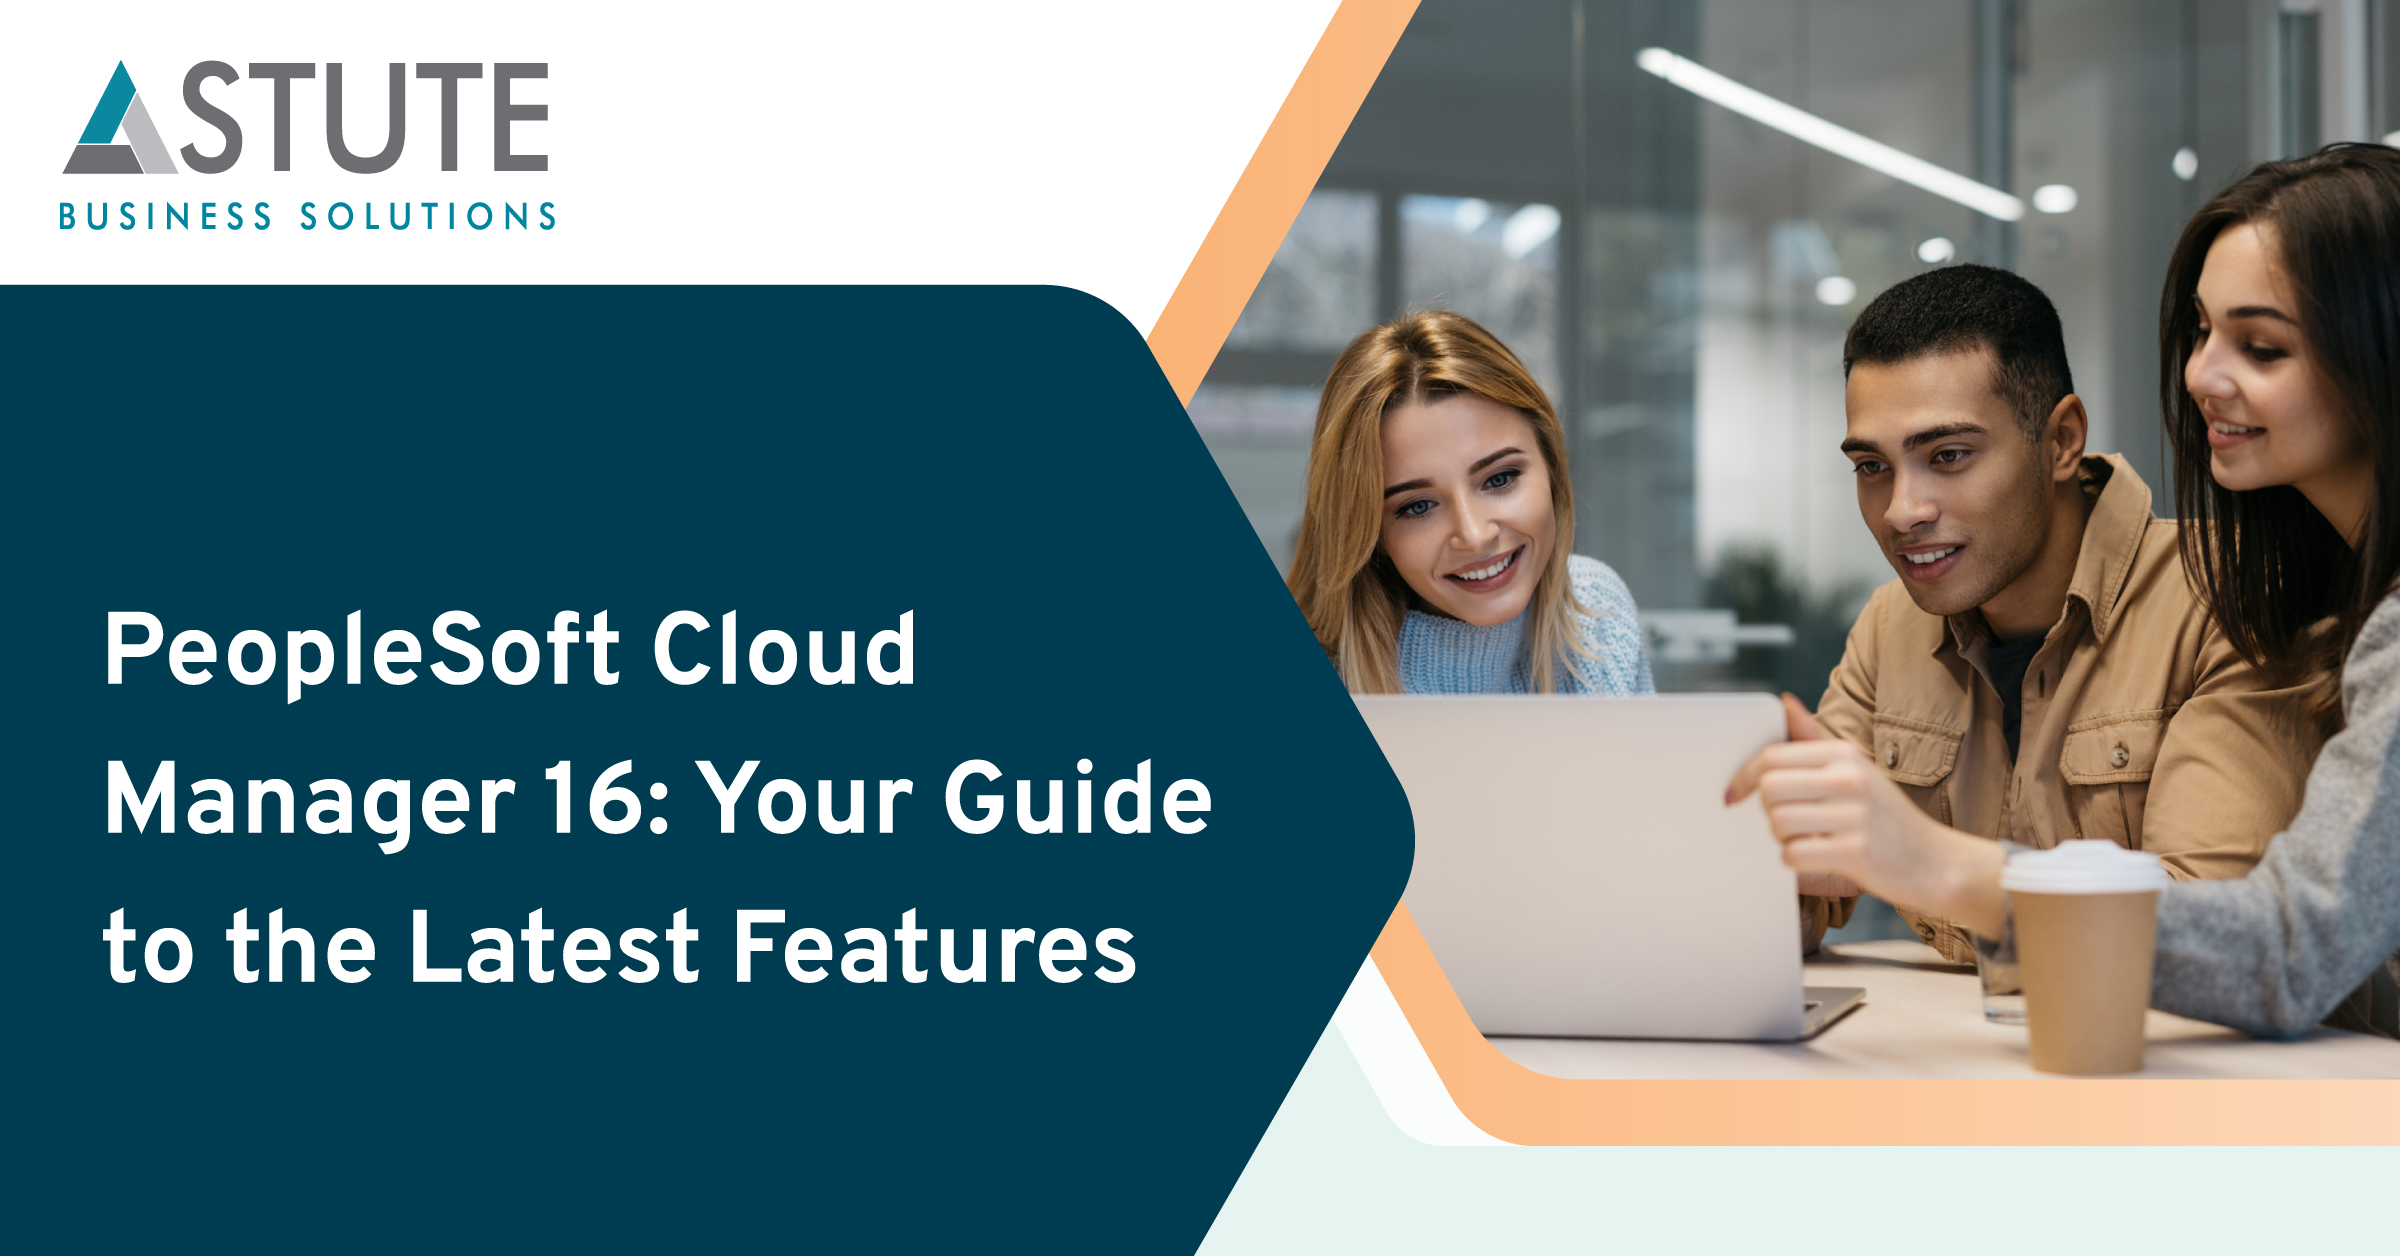 PeopleSoft Cloud Manager 16: Your Guide to the Latest Features